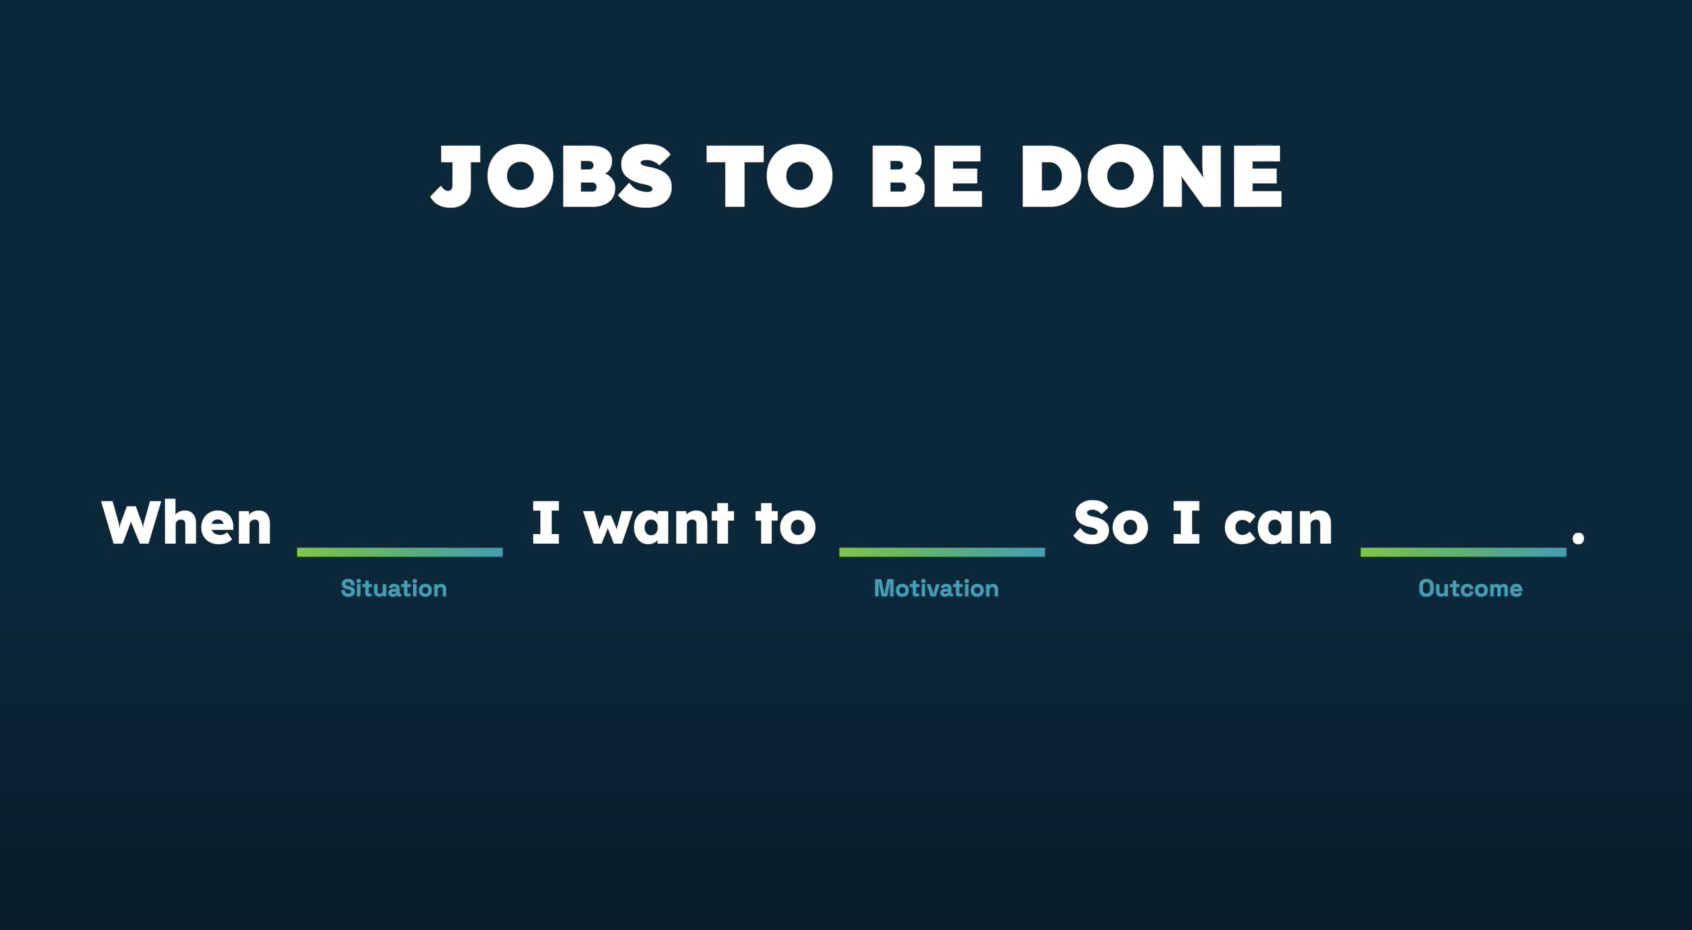 jobs_to_be_done_webinar_image